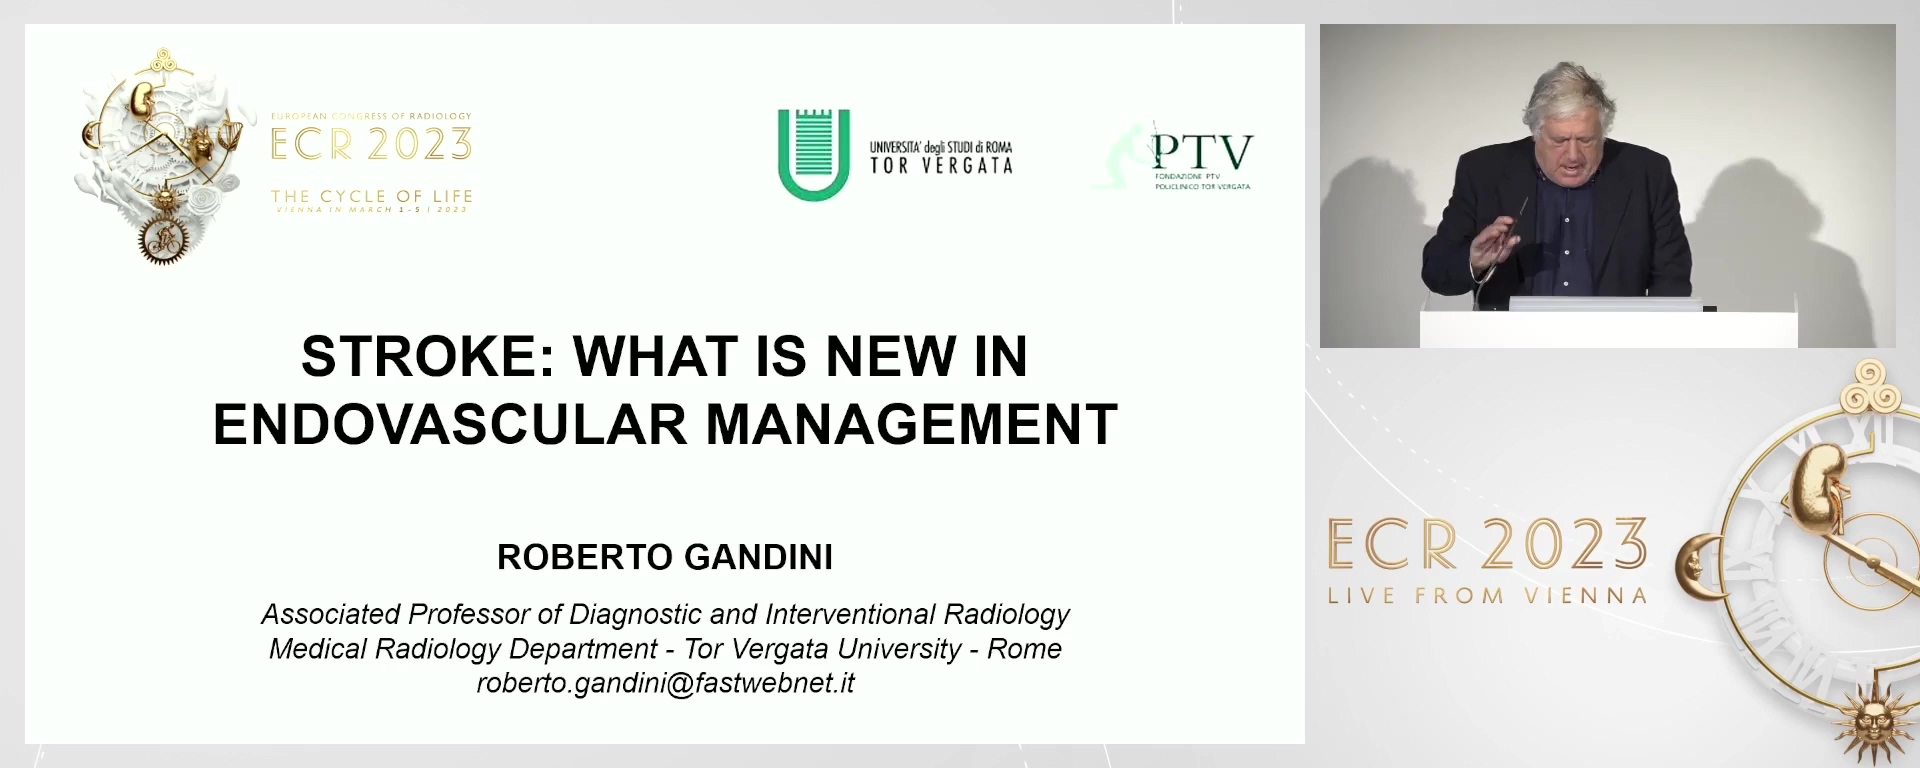 What is new in endovascular management - Roberto  Gandini, Rome / IT